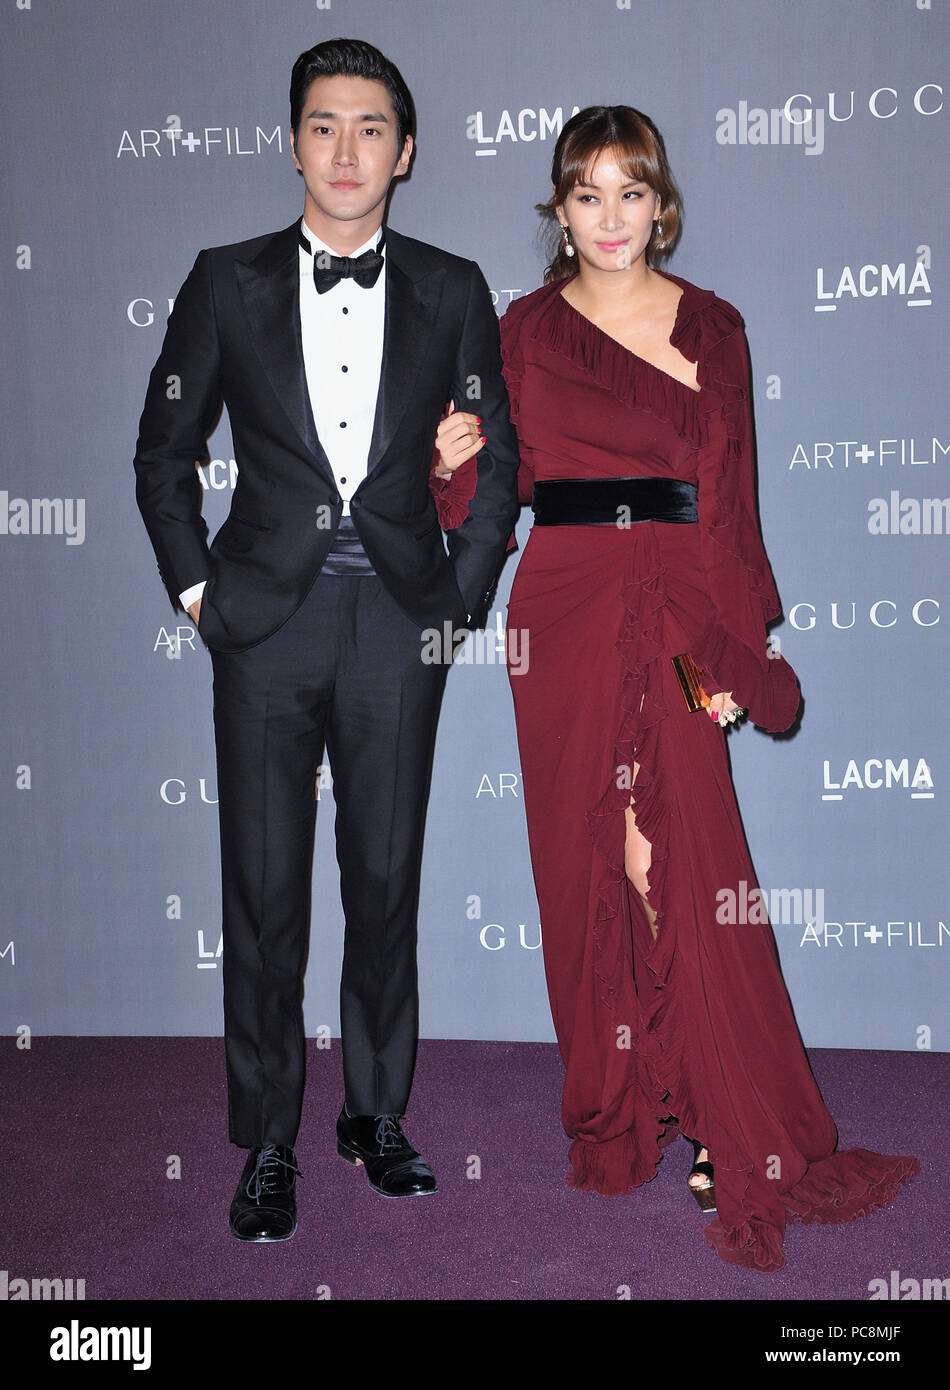 Choi Siwon  at the LACMA 2012 Art Film Gala at the LACMA Museum in Los Angeles.Choi Siwon  140 ------------- Red Carpet Event, Vertical, USA, Film Industry, Celebrities,  Photography, Bestof, Arts Culture and Entertainment, Topix Celebrities fashion /  Vertical, Best of, Event in Hollywood Life - California,  Red Carpet and backstage, USA, Film Industry, Celebrities,  movie celebrities, TV celebrities, Music celebrities, Photography, Bestof, Arts Culture and Entertainment,  Topix, vertical,  family from from the year , 2012, inquiry tsuni@Gamma-USA.com Husband and wife Stock Photo